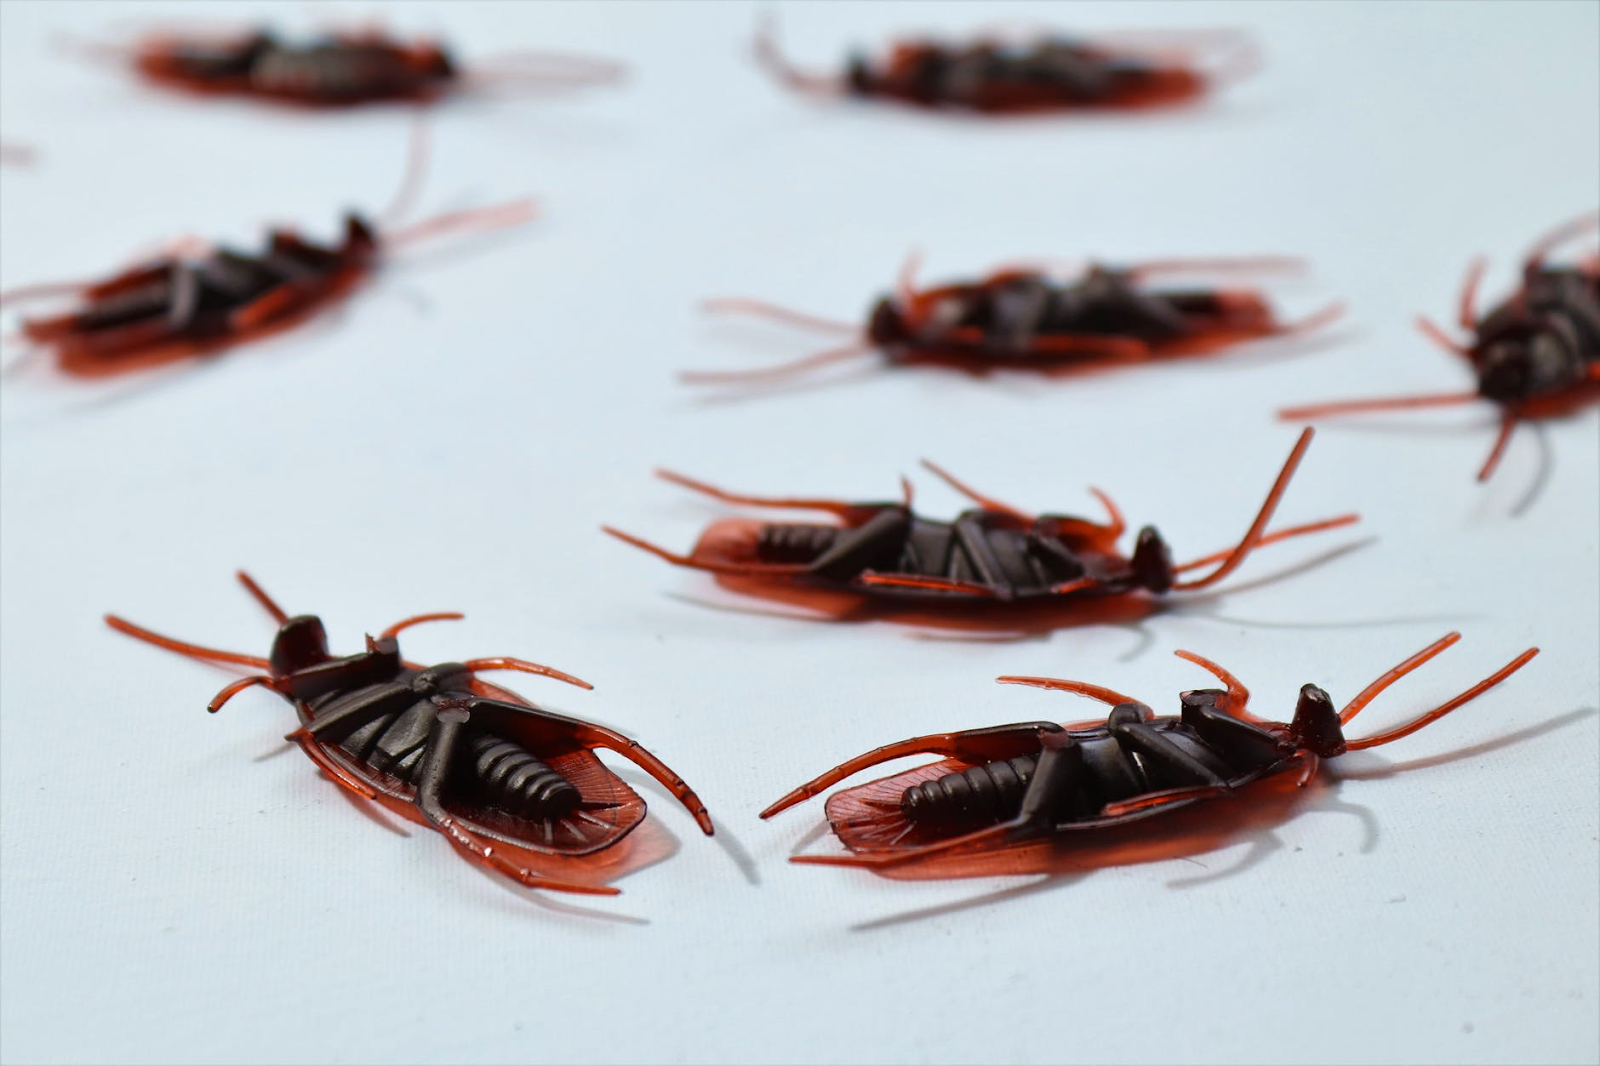 Fake toy cockroaches laid out on white table on backs.